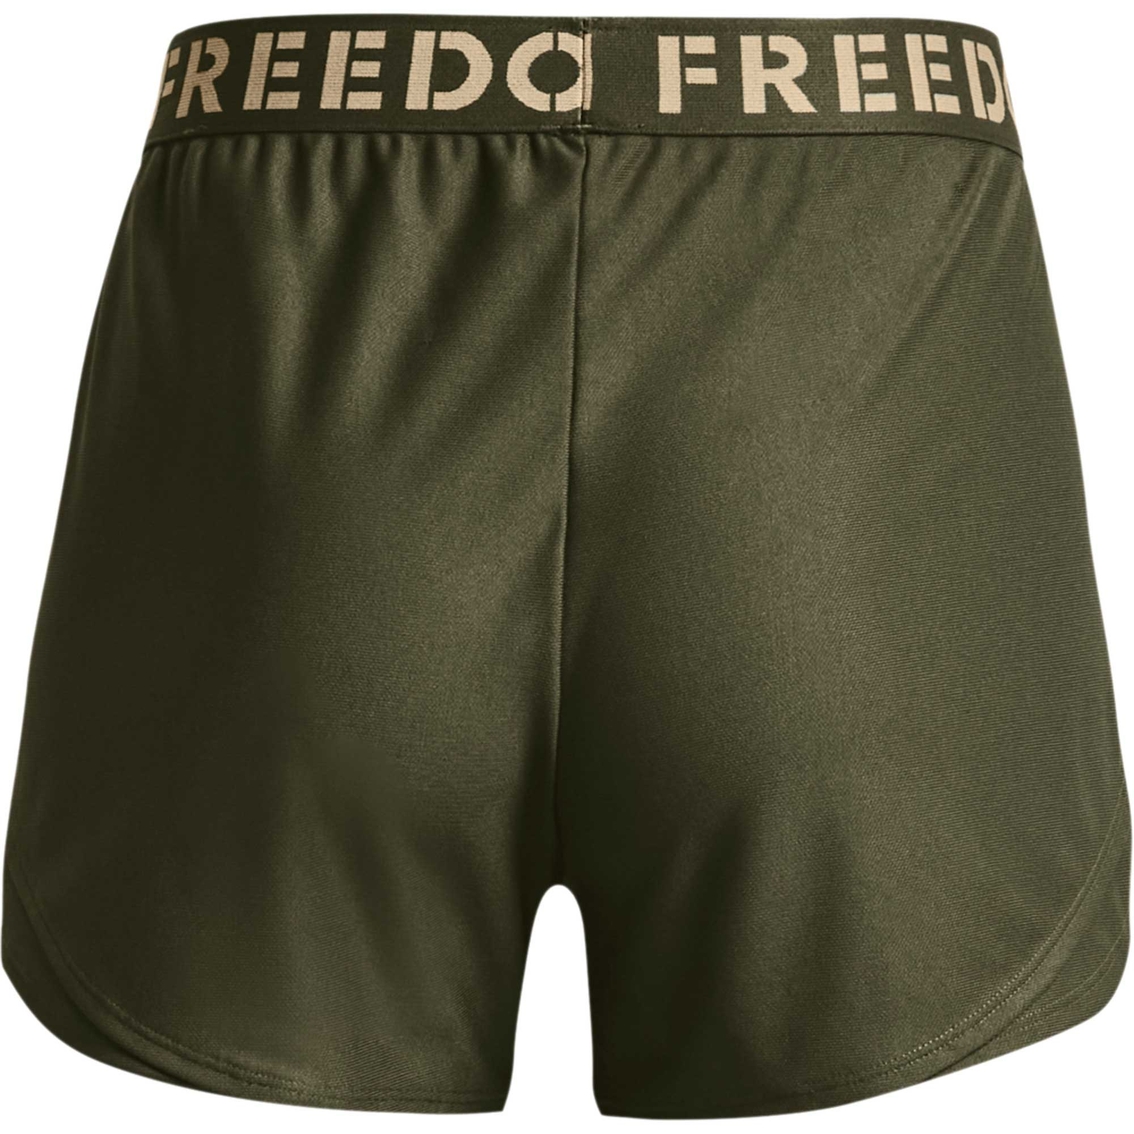 Under Armour Freedom Play Up Shorts - Image 2 of 6